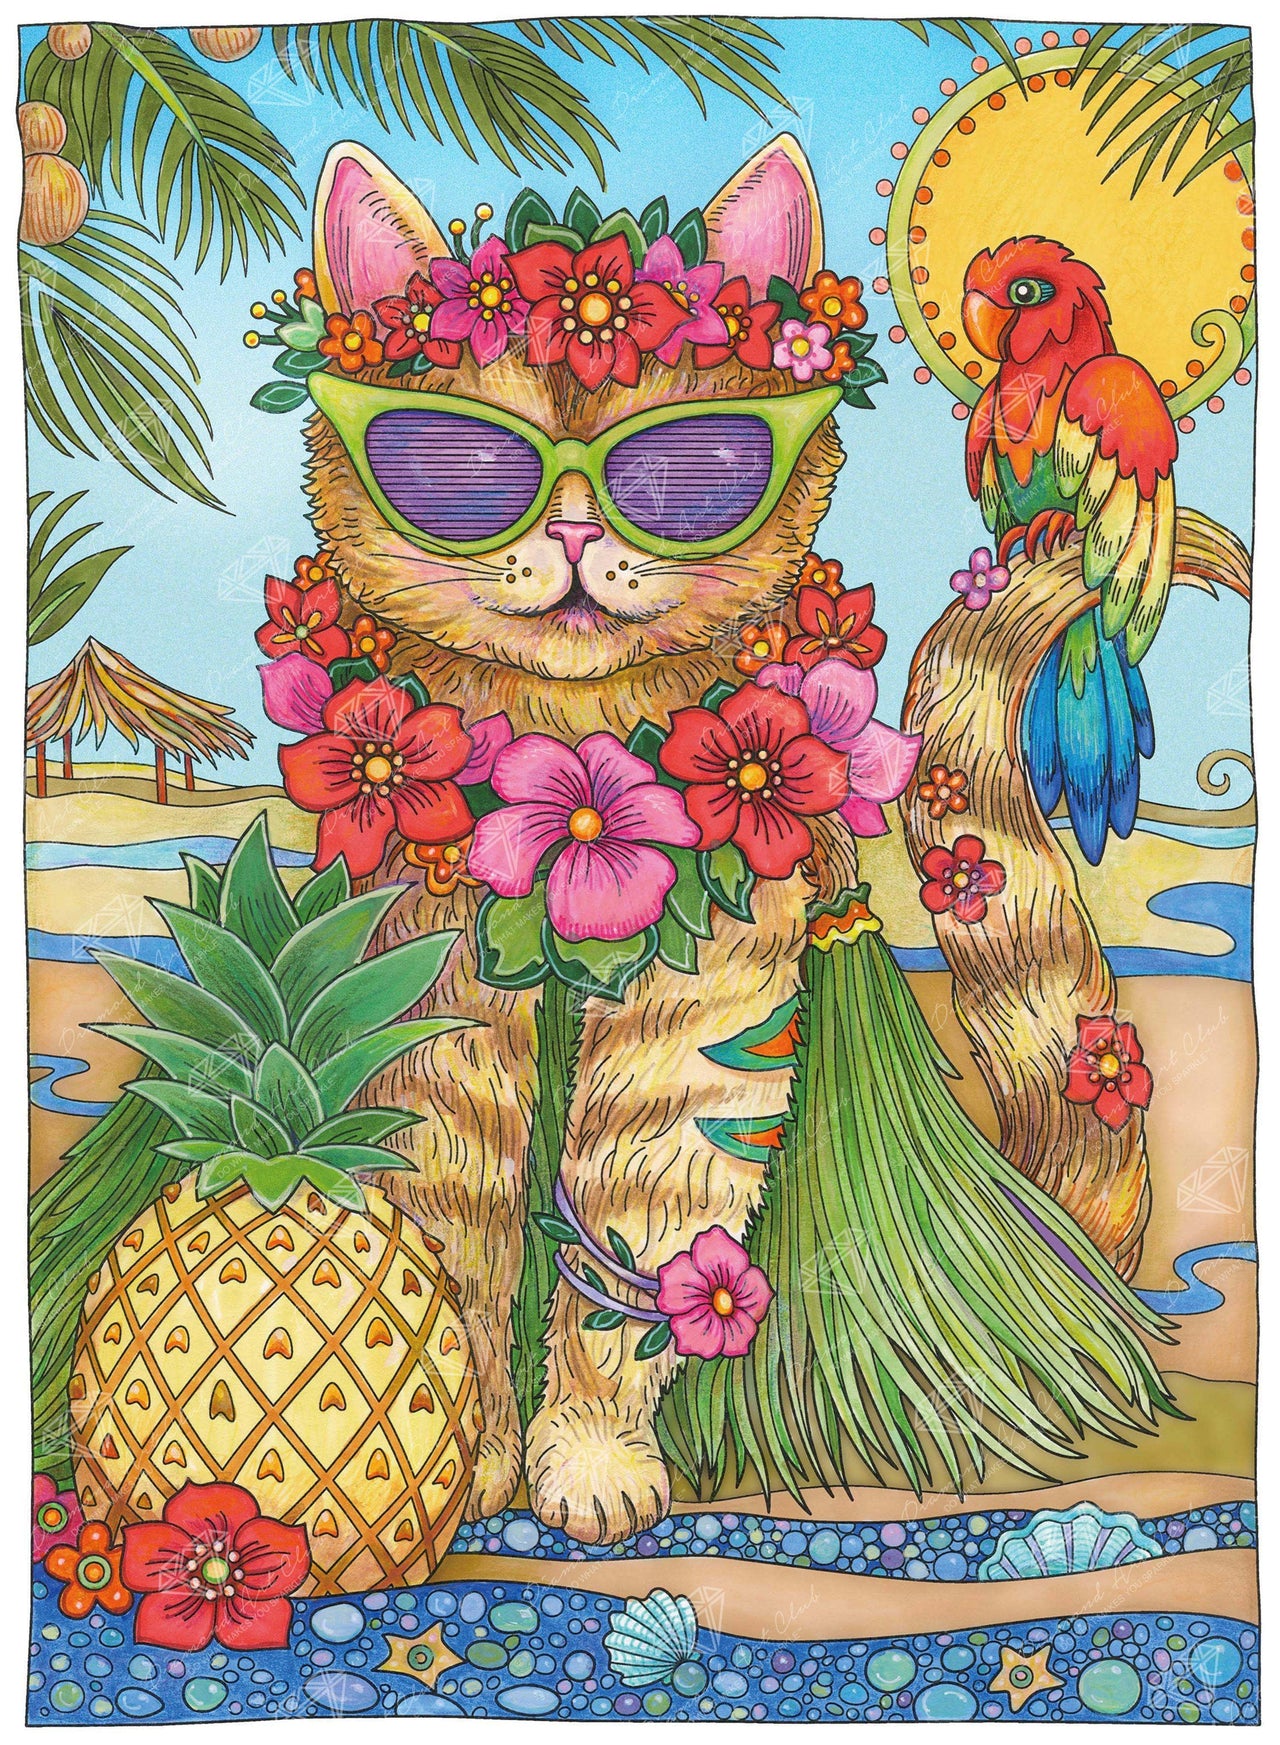 Diamond Painting Hawaiian Cat 22" x 30″ (56cm x 76cm) / Round with 41 Colors including 2 ABs / 53,460